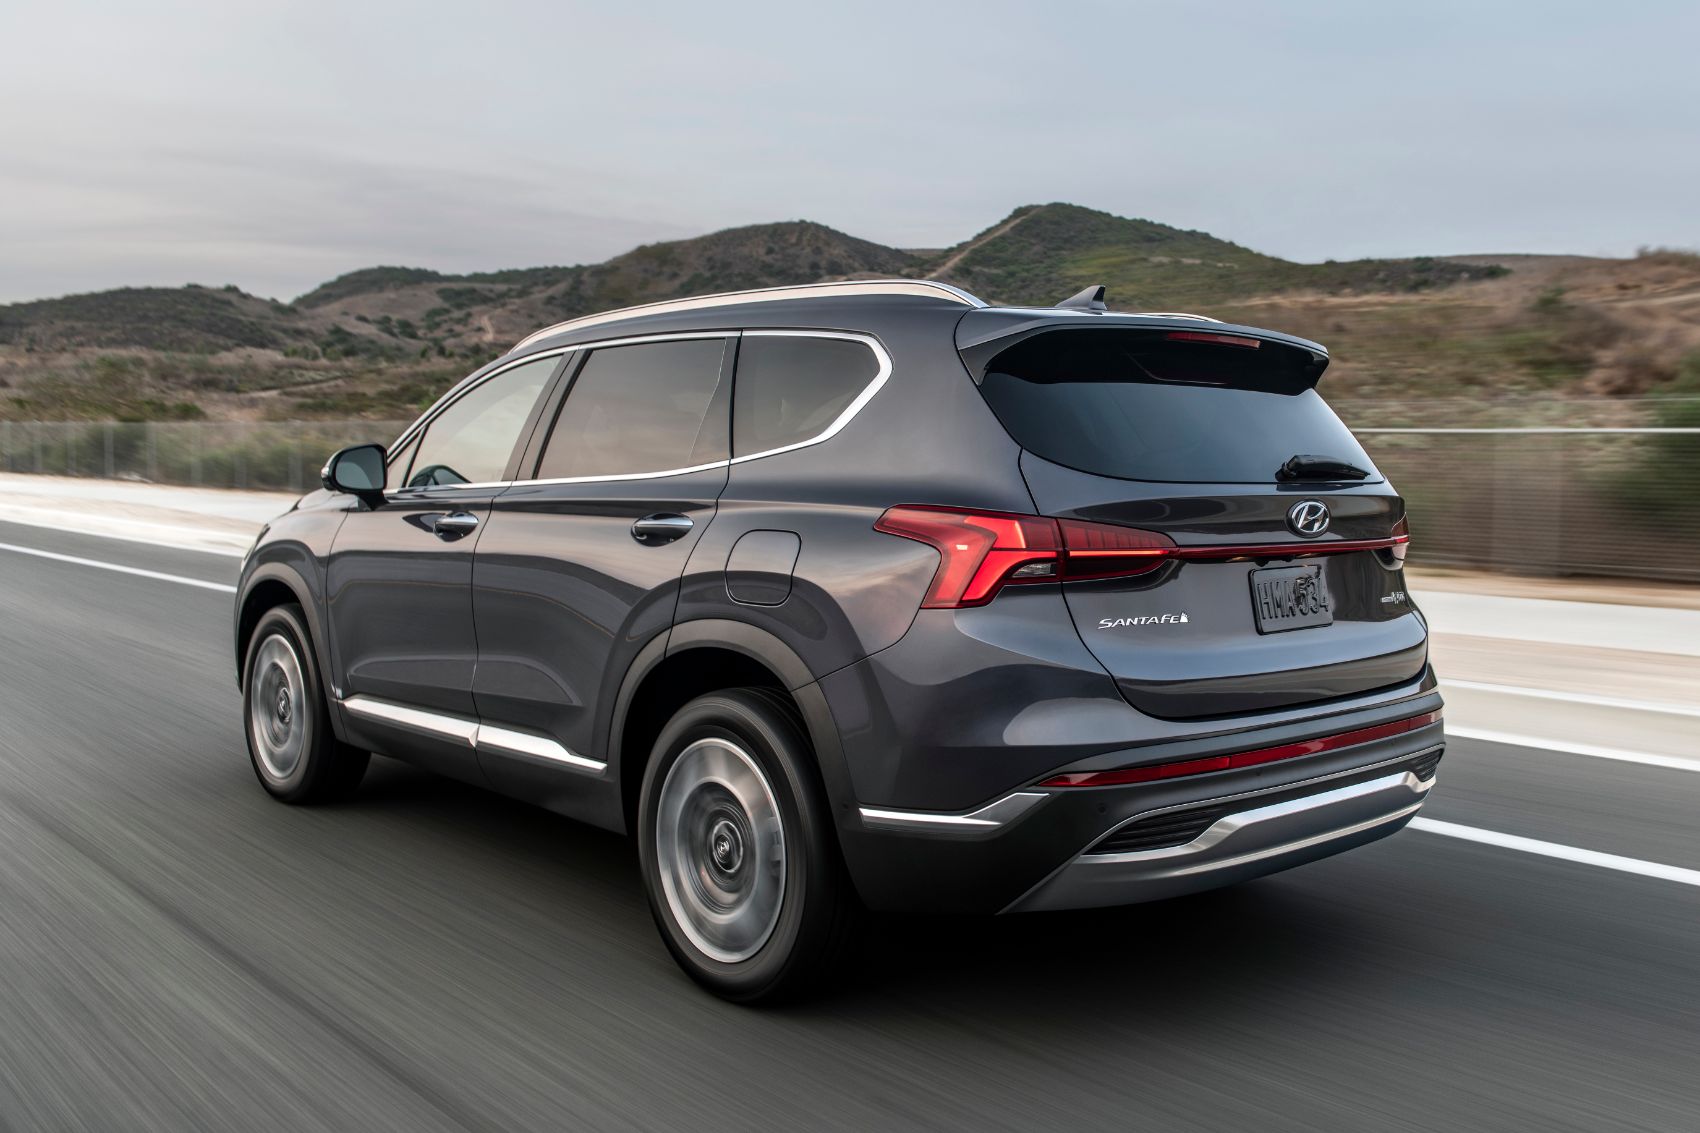 2021 Hyundai Santa Fe Overview Upgraded Engines More Creature 